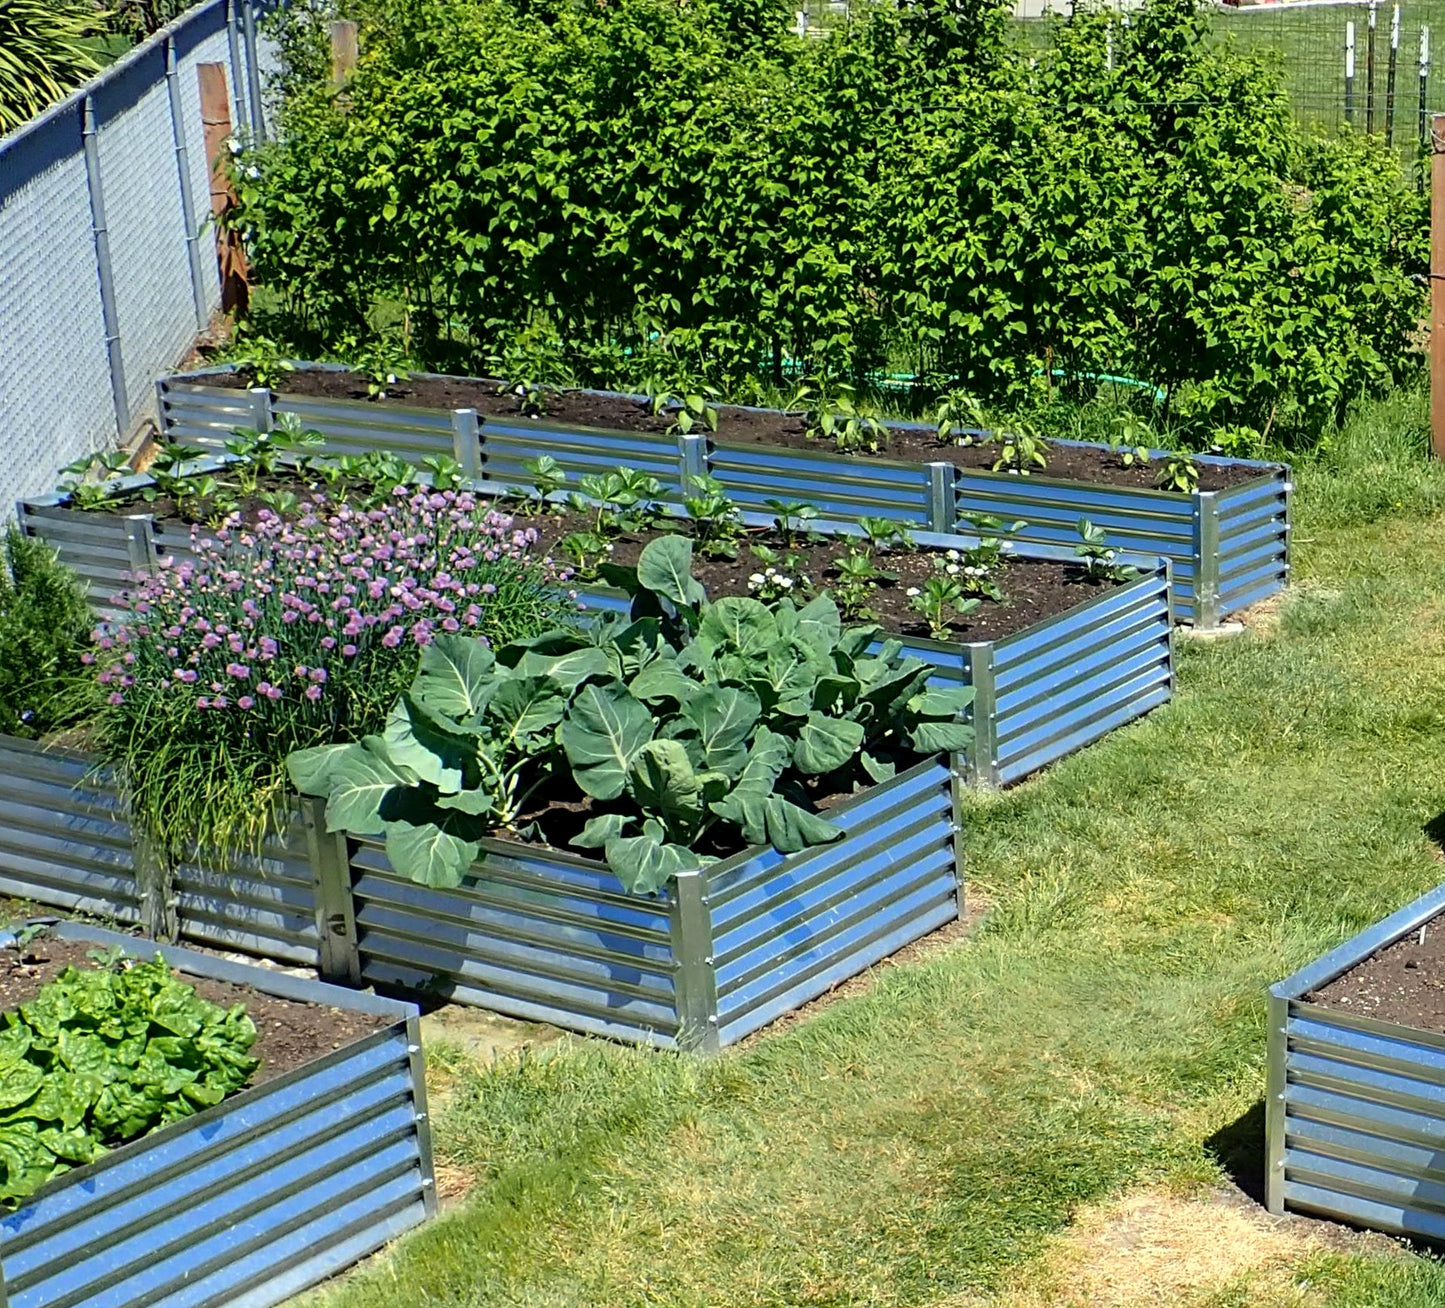 exacto garden bed with cabbage and chives